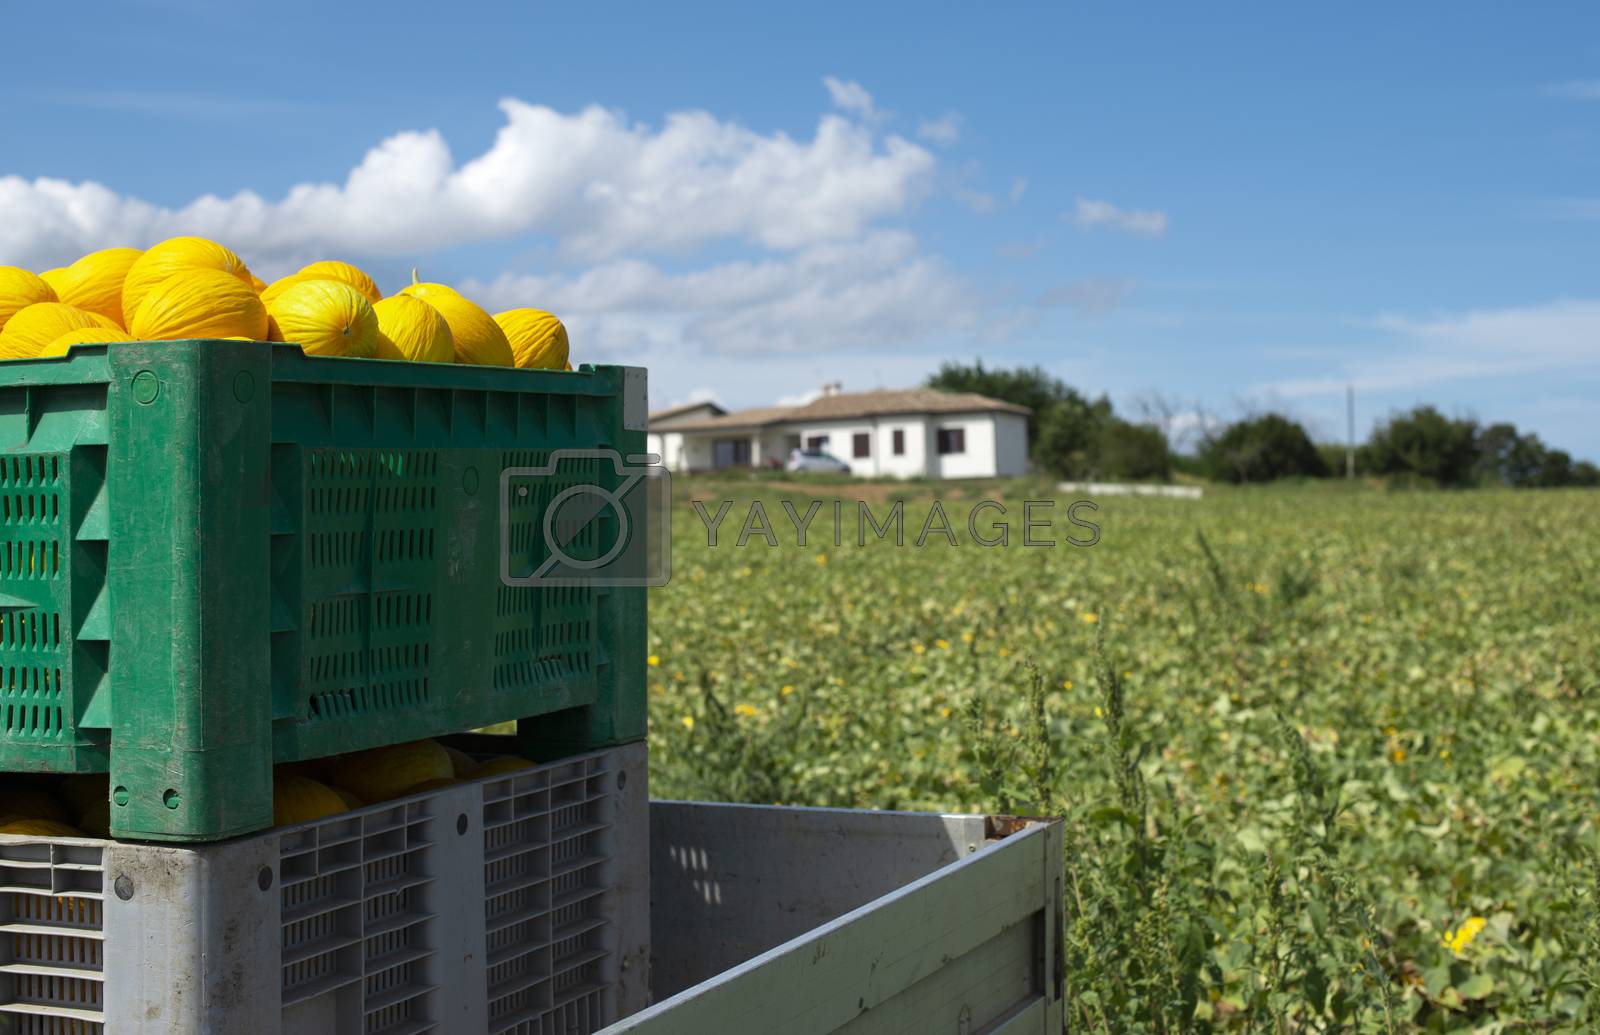 Royalty free image of Canary melons in crate loaded on truck from the farm. by deyan_georgiev